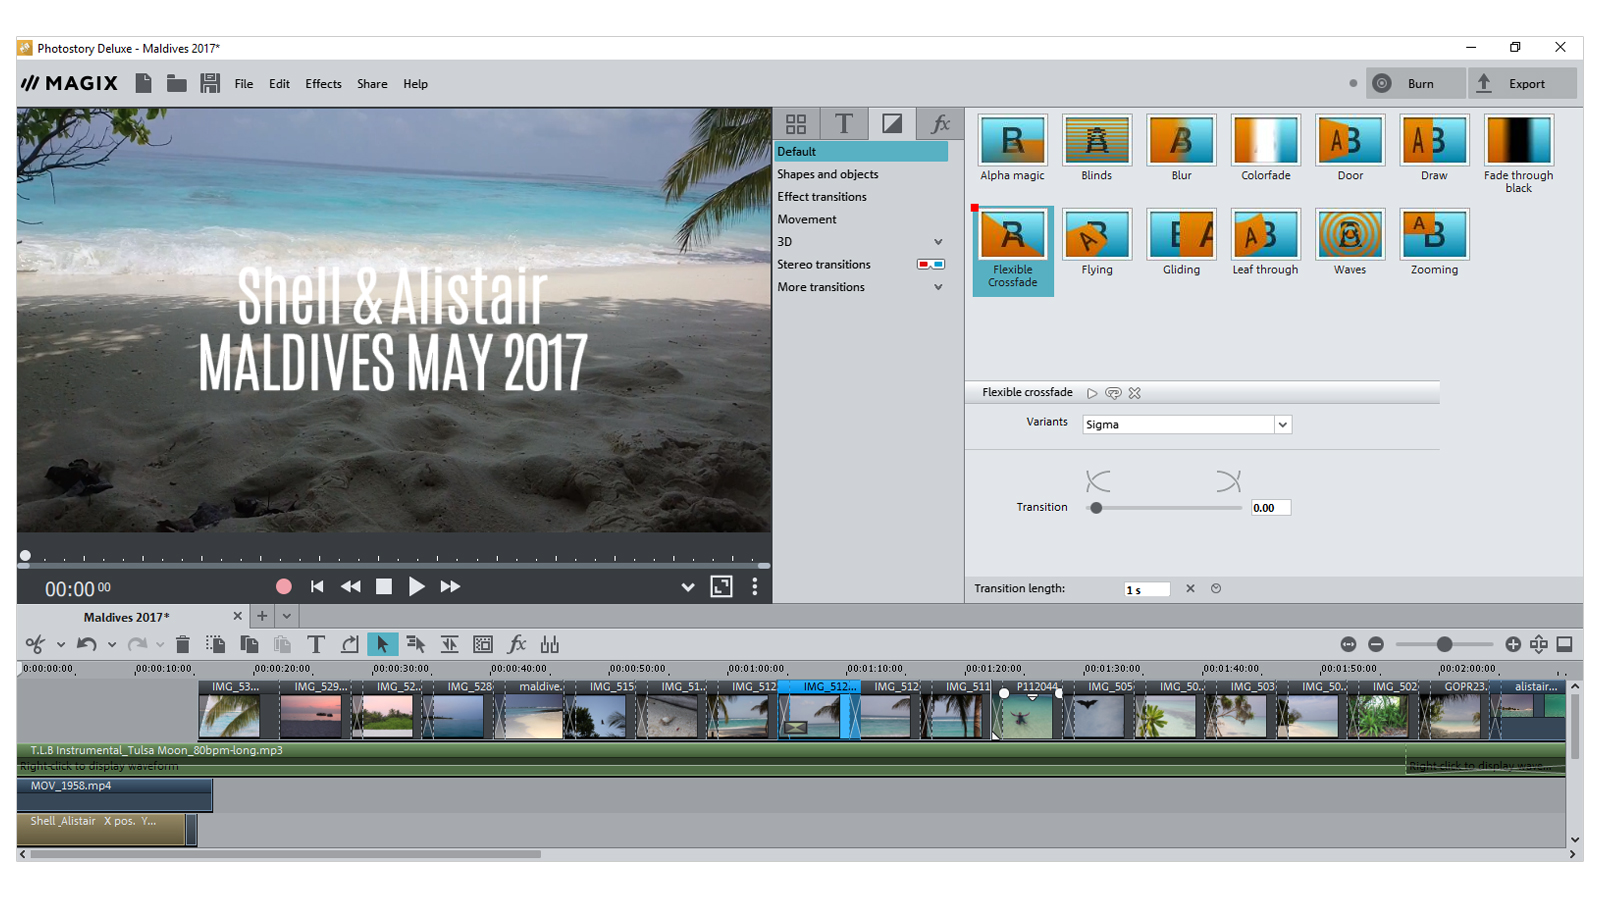 magix photostory deluxe 2018 serial